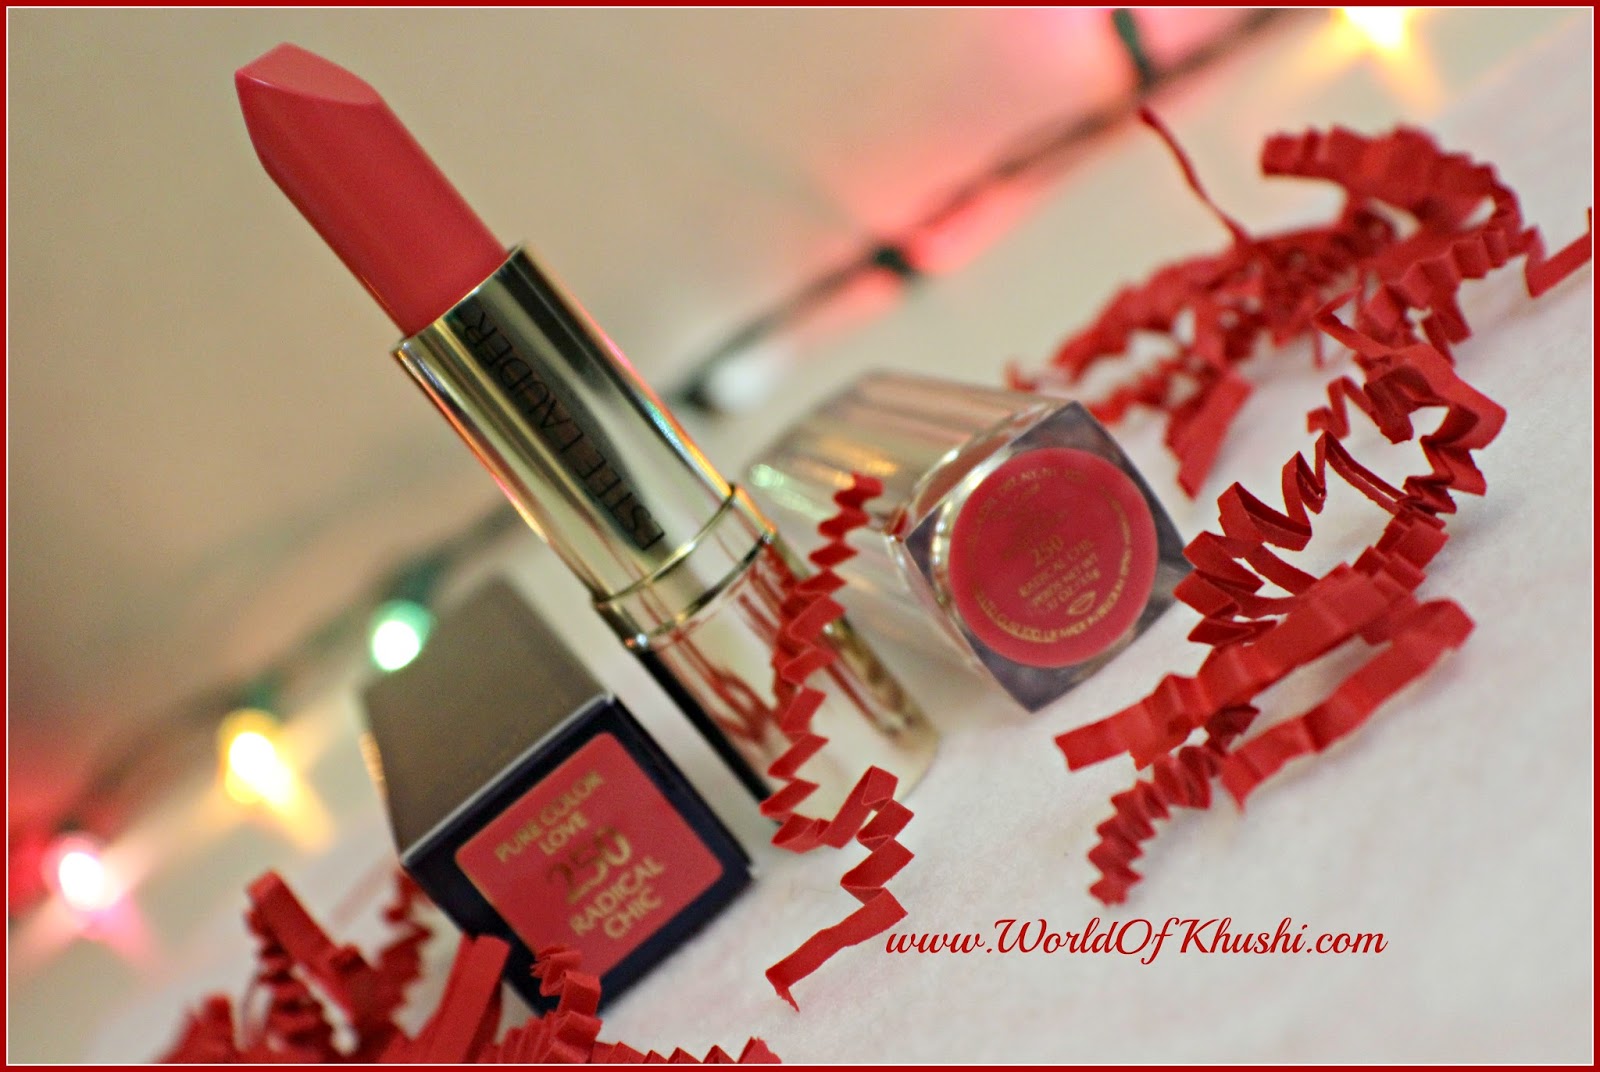 KhushiWorld - A Of Recipes,Arts,Crafts,DIY,Fashion,Beauty and Estee Lauder Pure Color Love Lipstick in Radical Chic | Review